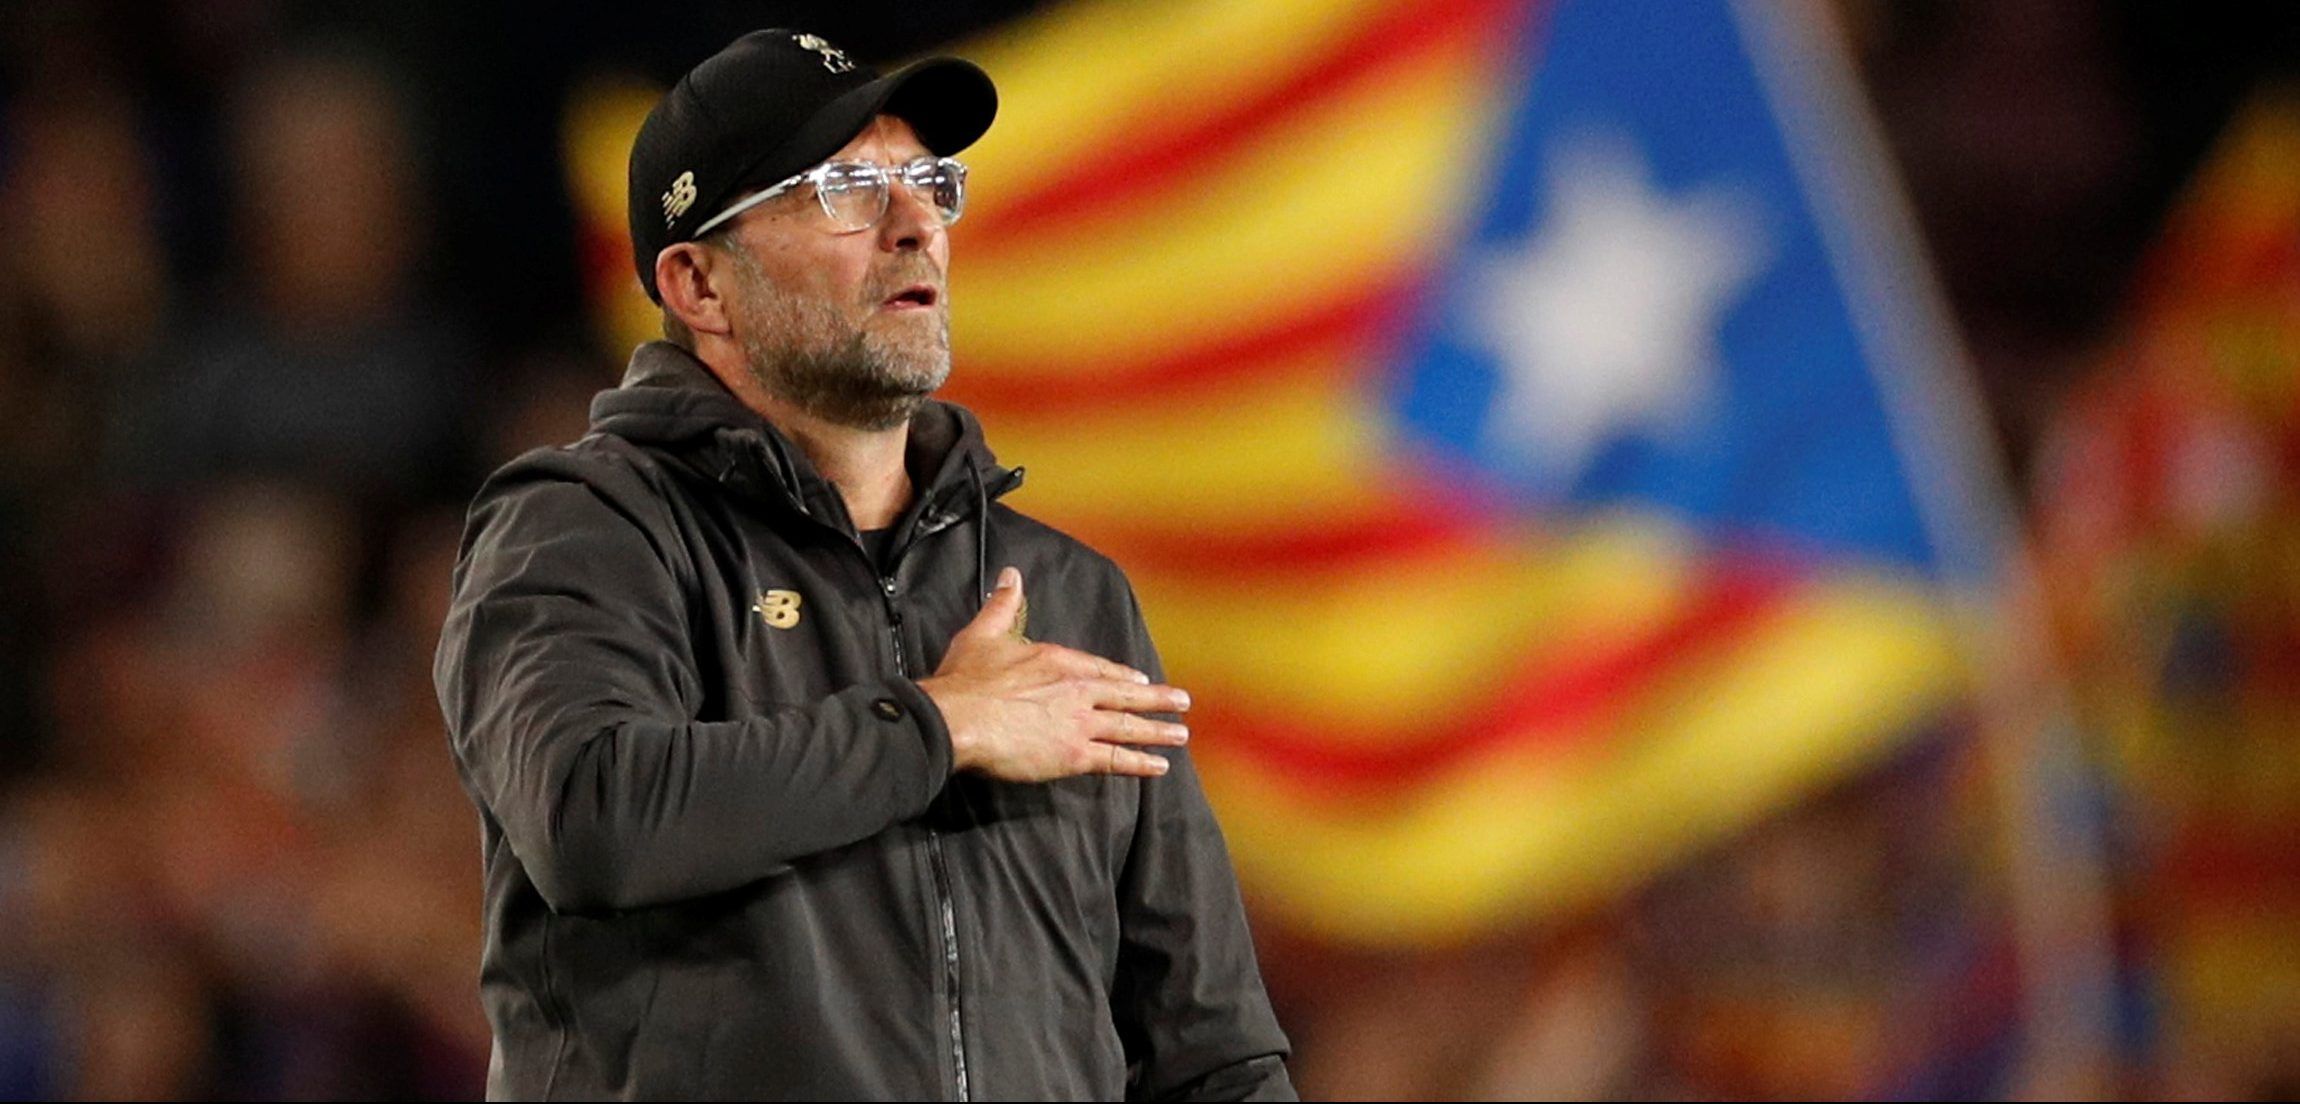 Soccer Football - Champions League Semi Final First Leg - FC Barcelona v Liverpool - Camp Nou, Barcelona, Spain - May 1, 2019  Liverpool manager Juergen Klopp after the match             Action Images via Reuters/John Sibley